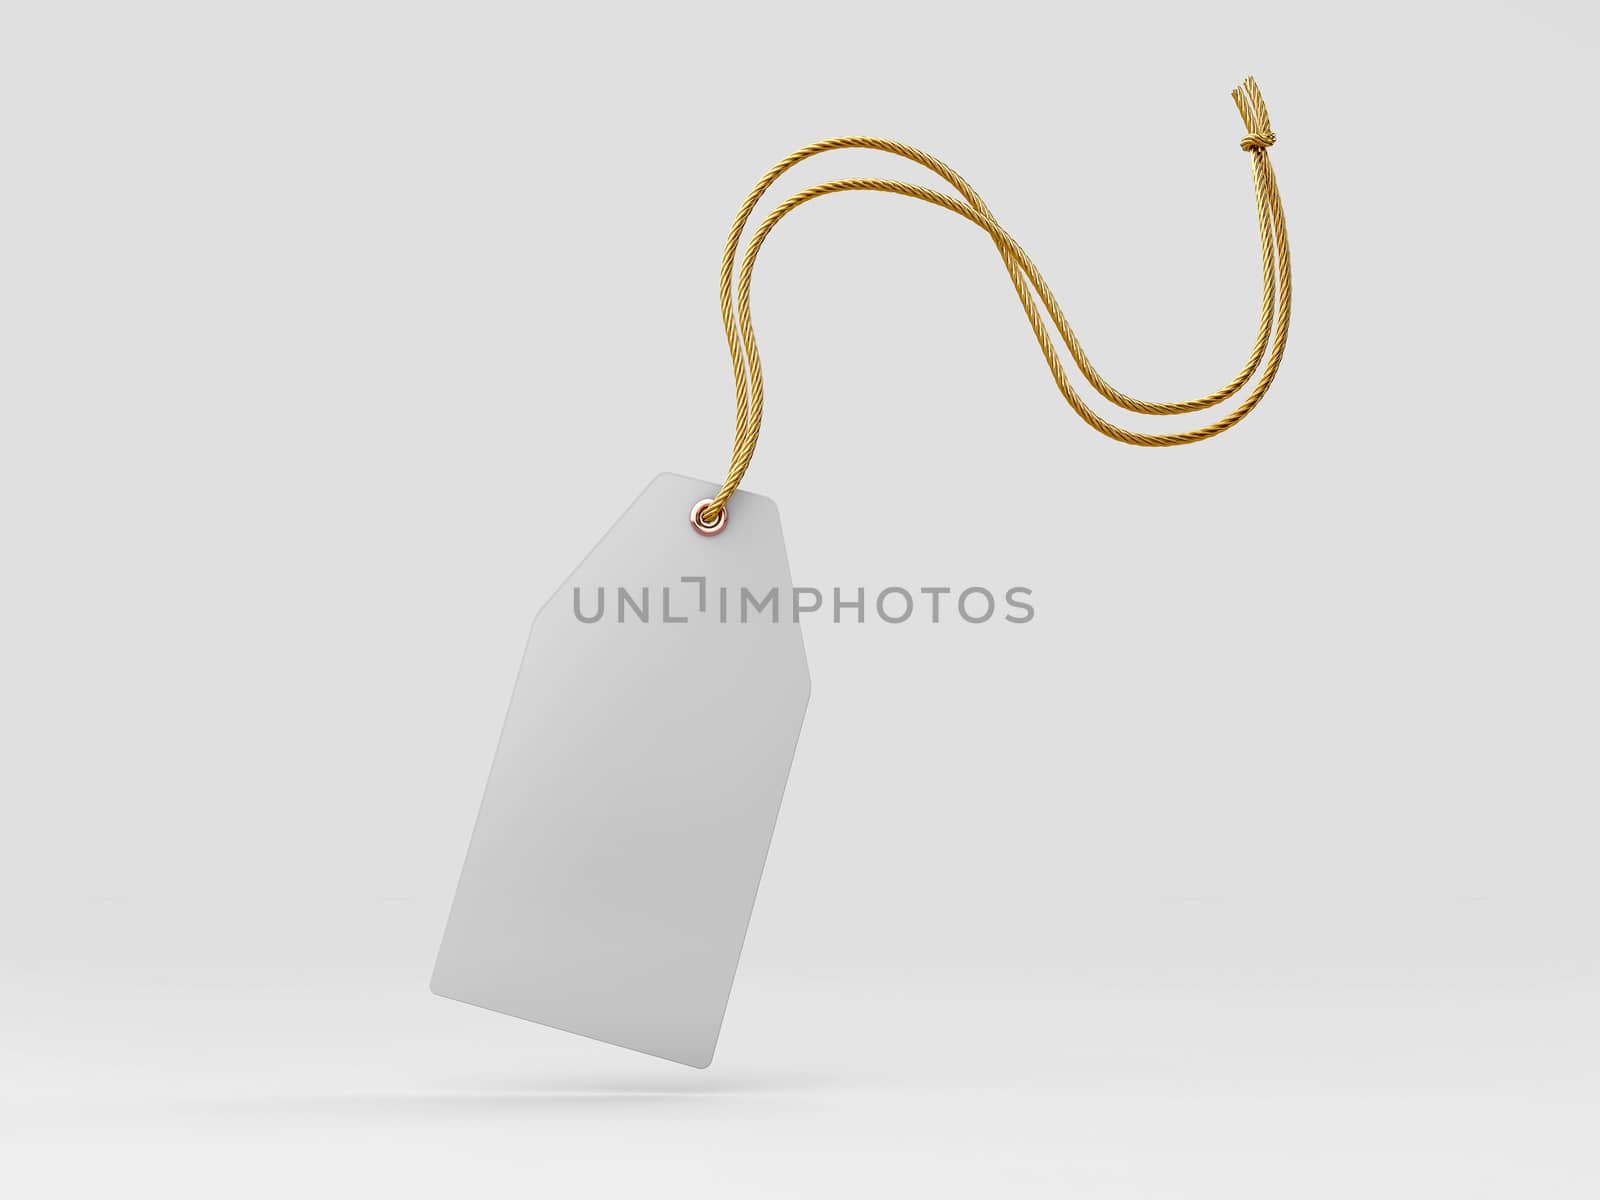 3drendering of Blank tag tied with brown string. Price tag, gift tag, clipping path included.